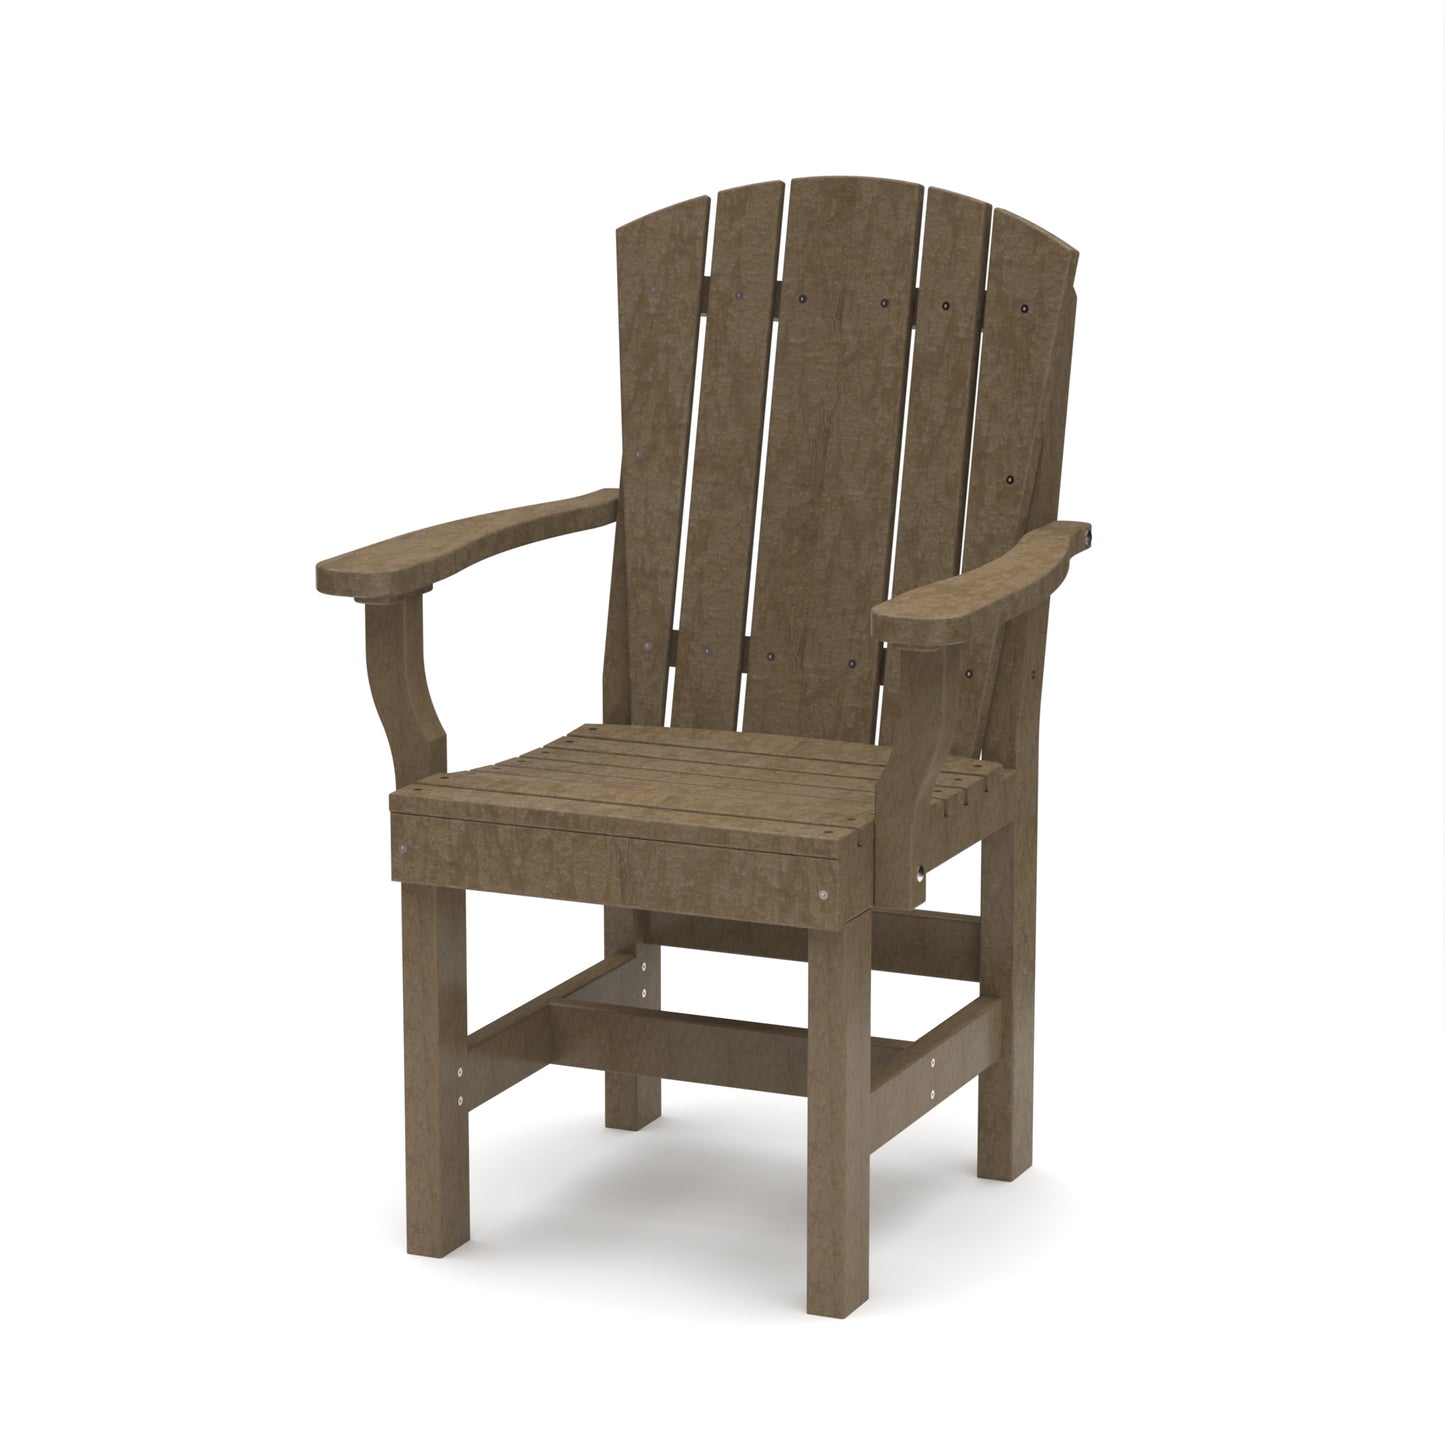 Wildridge Recycled Plastic Heritage Outdoor Dining Chair with Arms - LEAD TIME TO SHIP 4 WEEKS